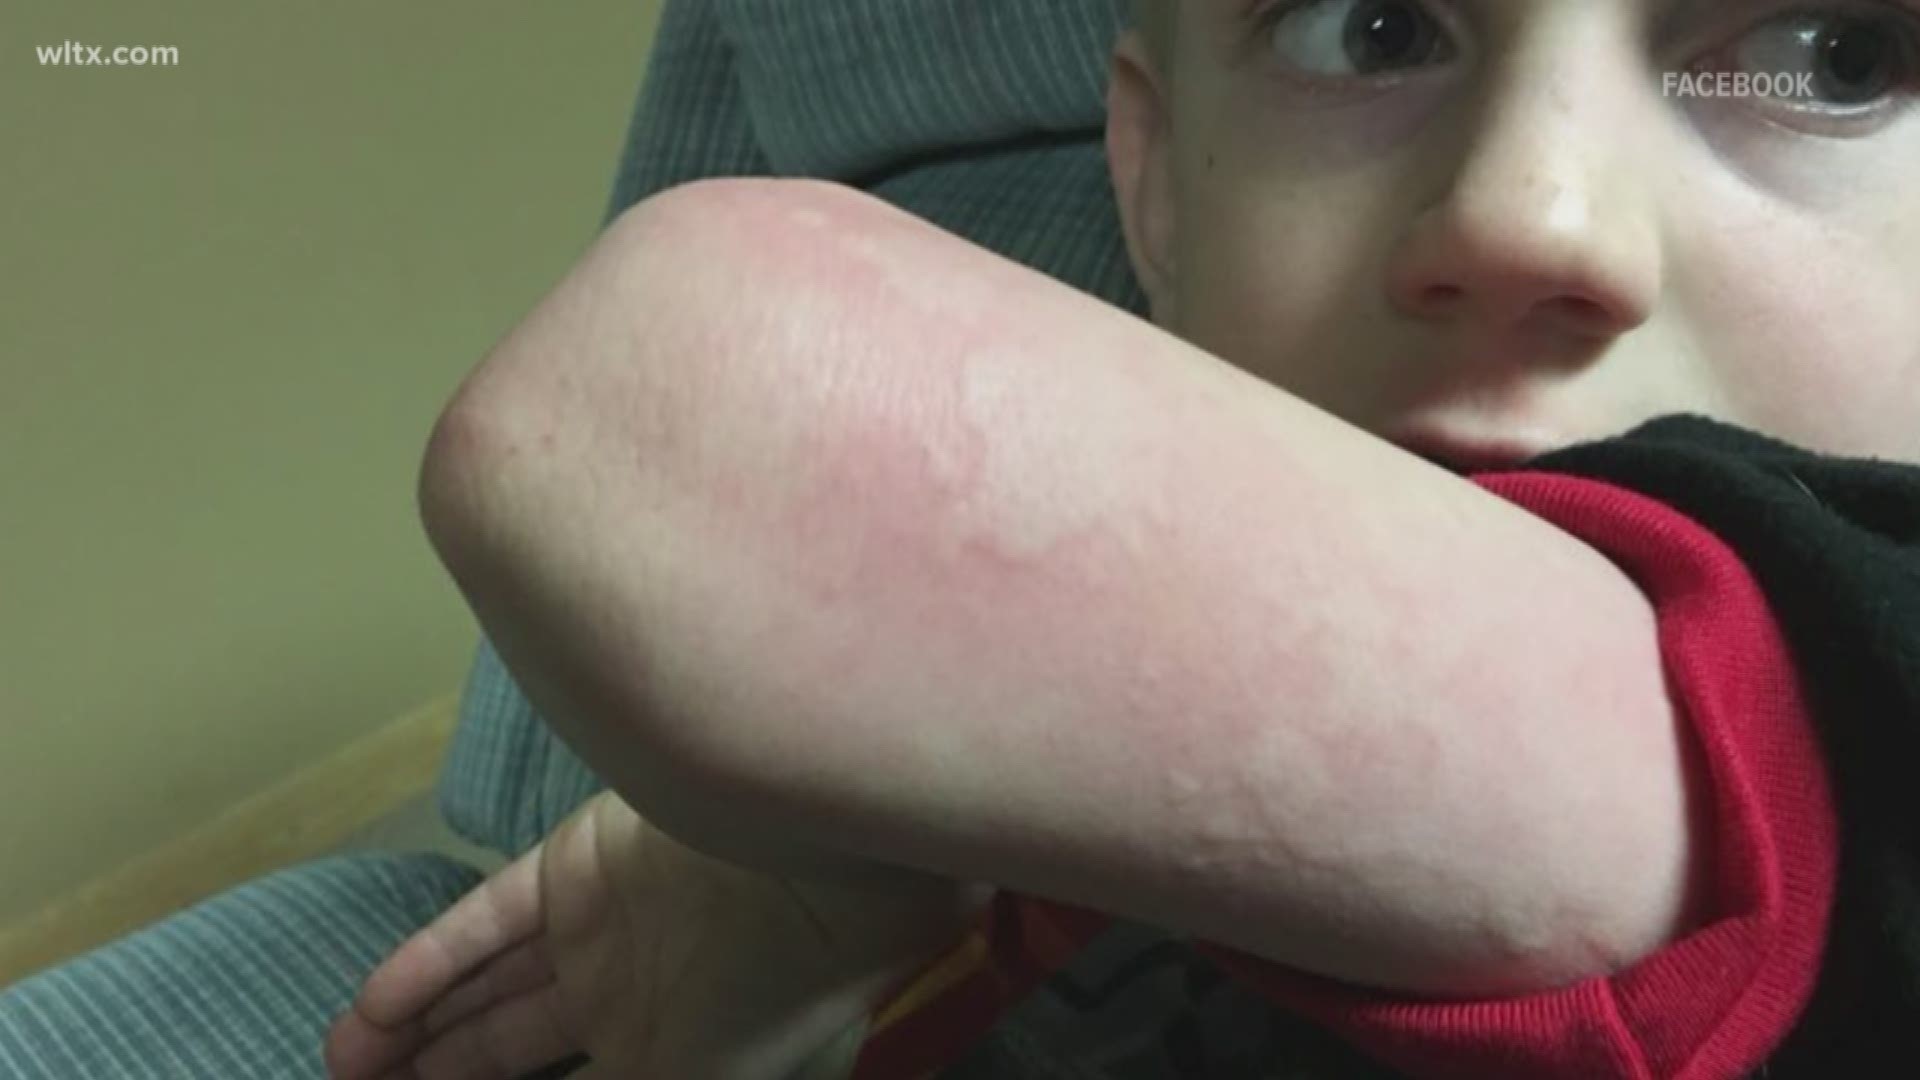 A mom says her son test positive for the flu, but did not have a fever, cough or runny nose. The CDC says symptoms can vary.